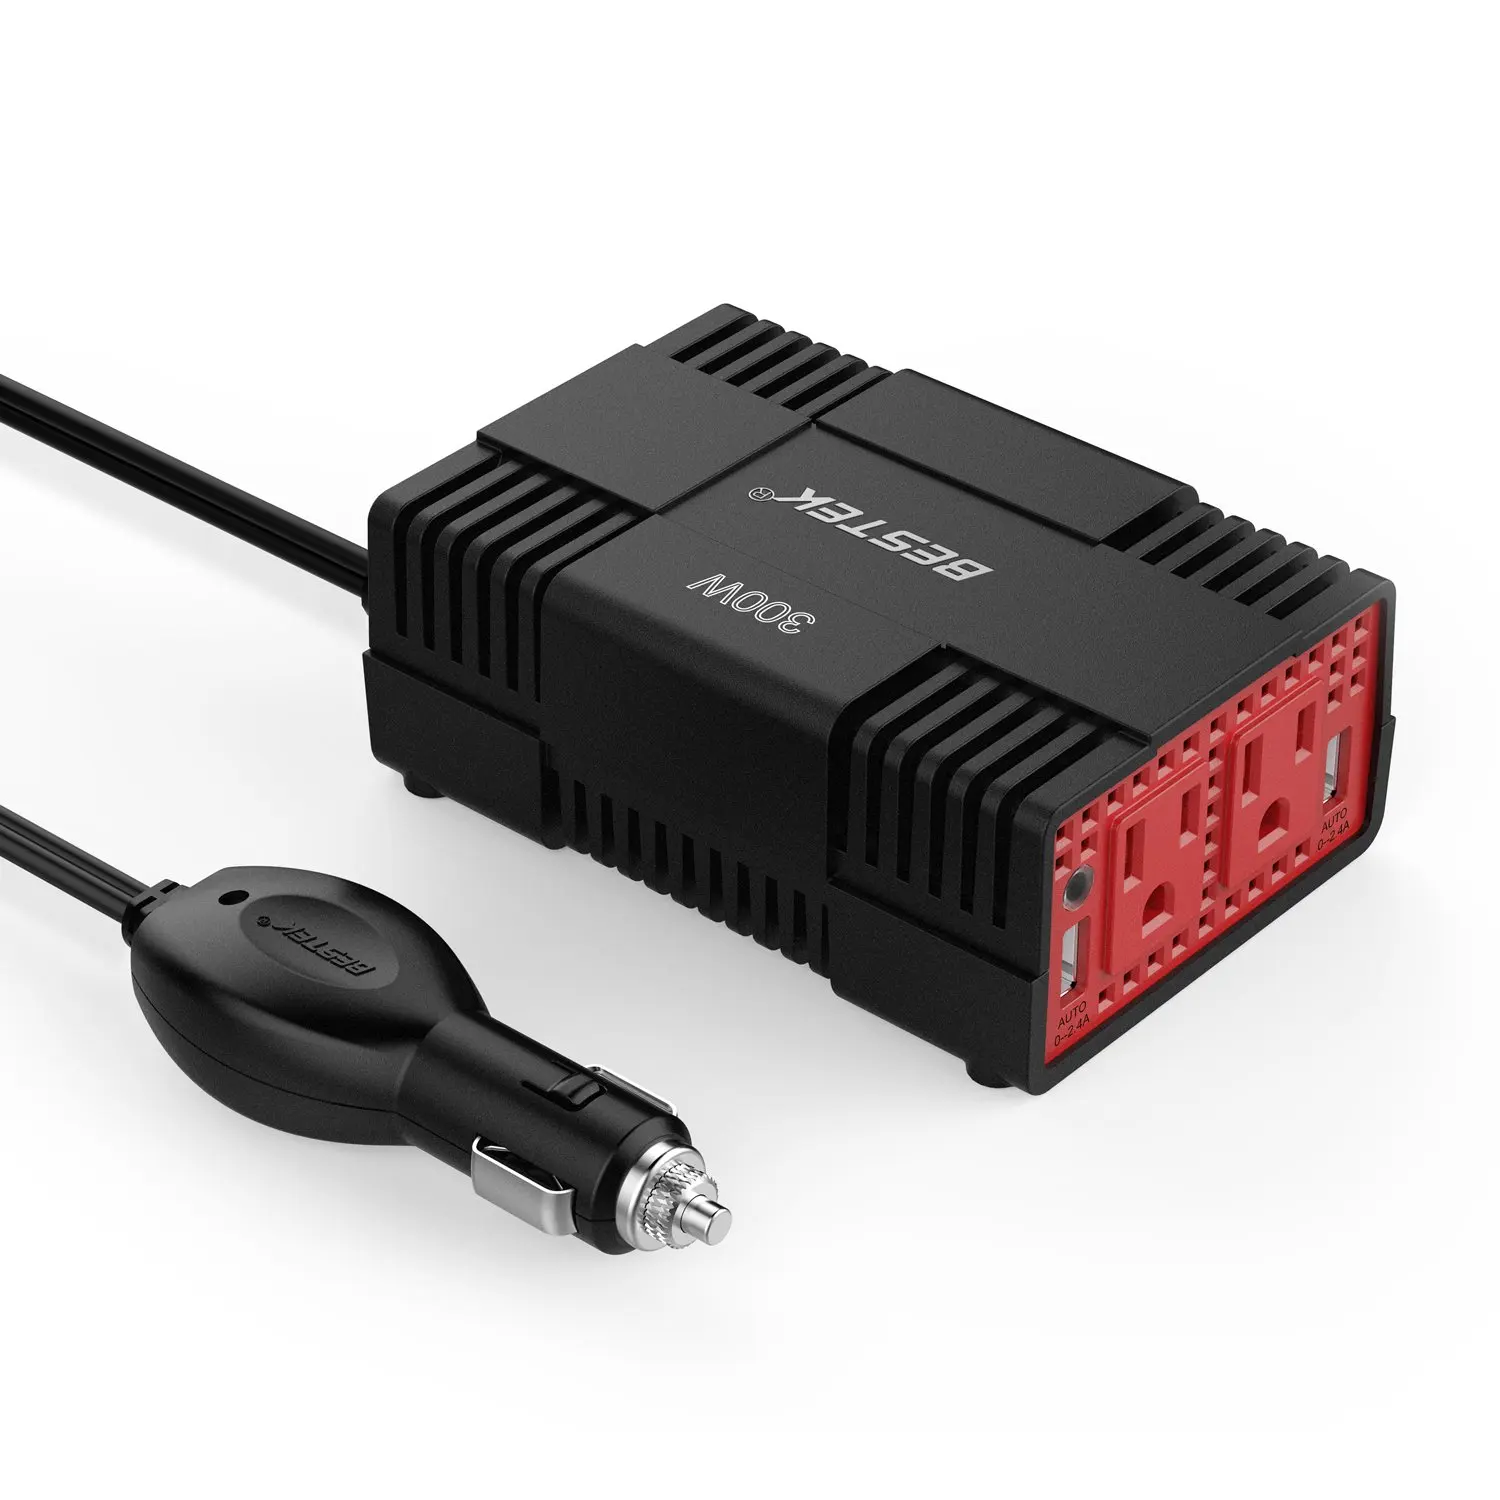 Buy Coocheer 300W Power Inverter DC 12V to 110V AC Car Inverter with 1A